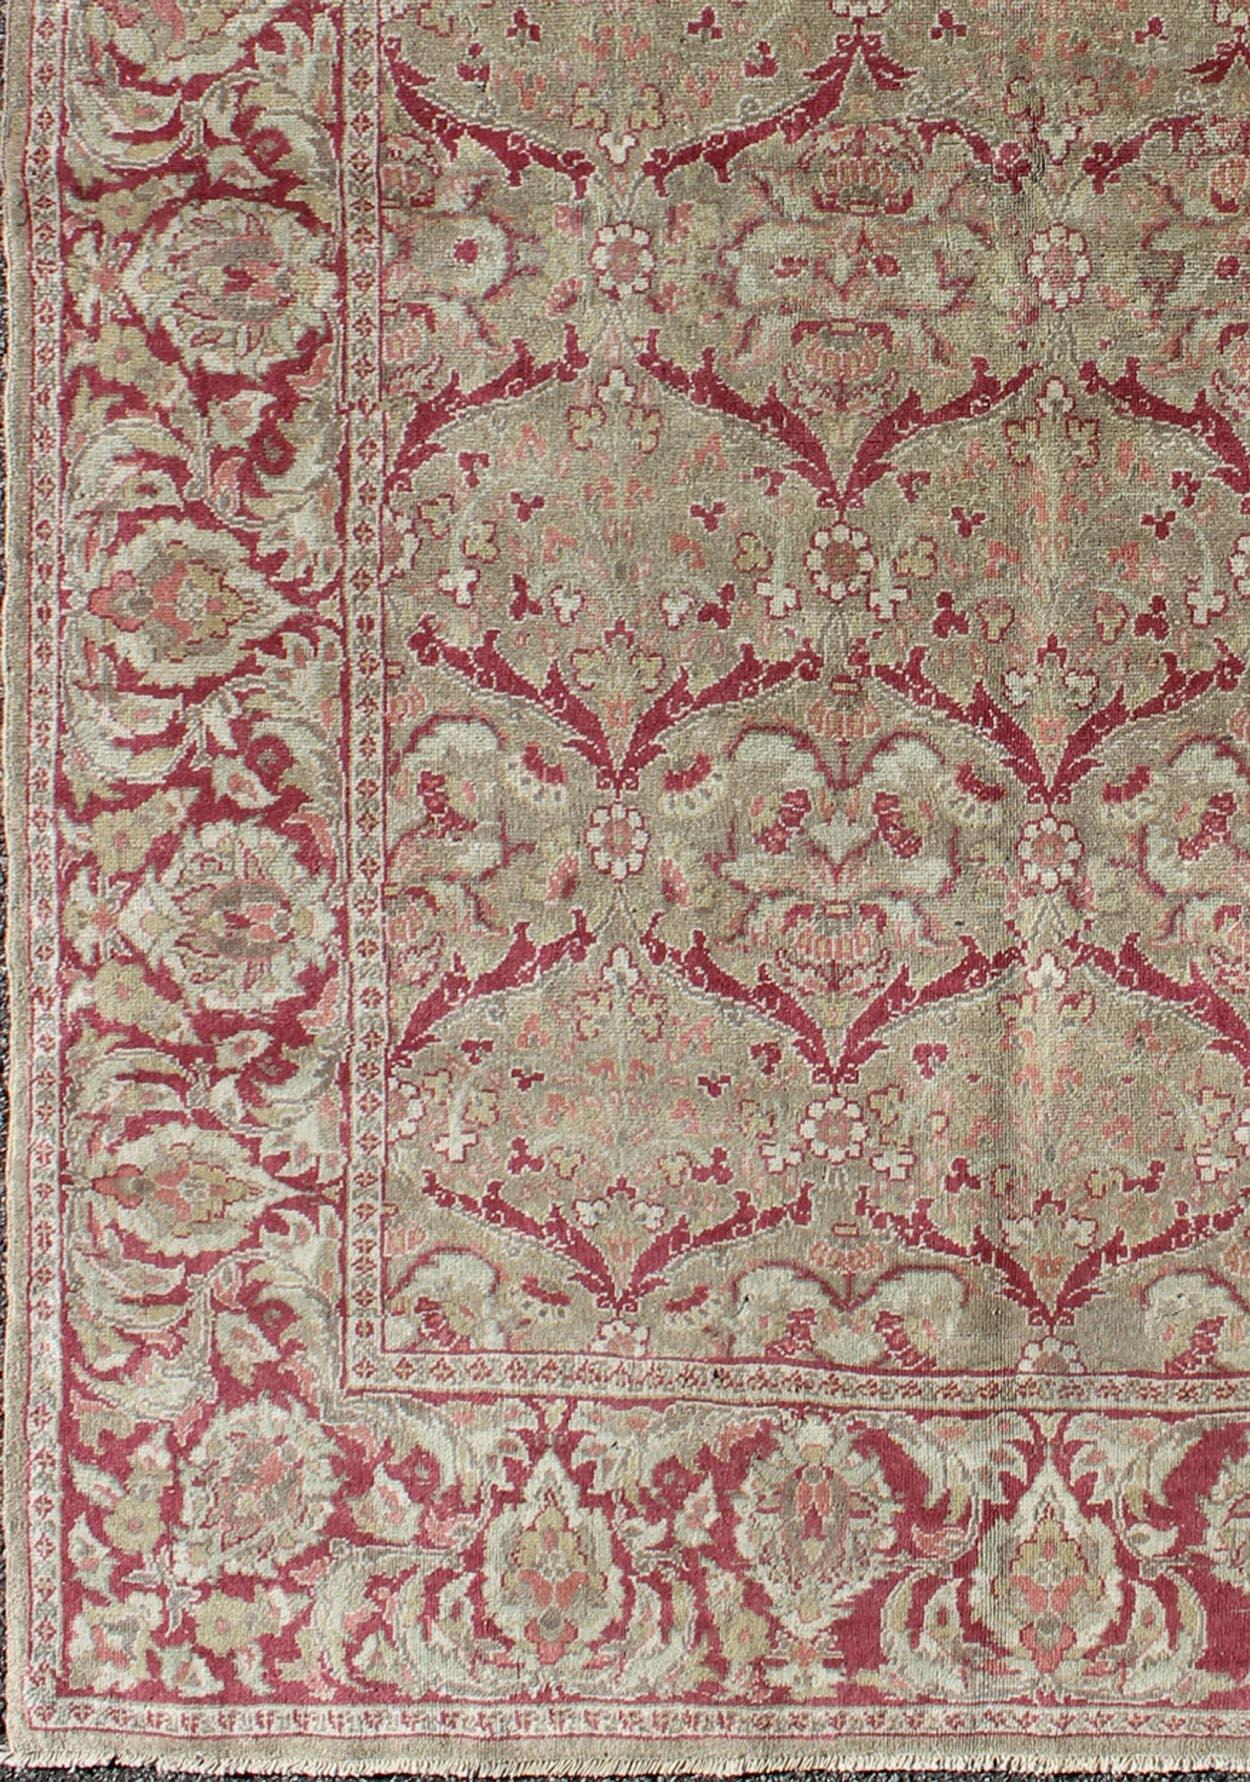 Hand-Knotted Vintage Turkish Sivas Rug in Burgundy Red, Cream, & Taupe with All-Over Design For Sale